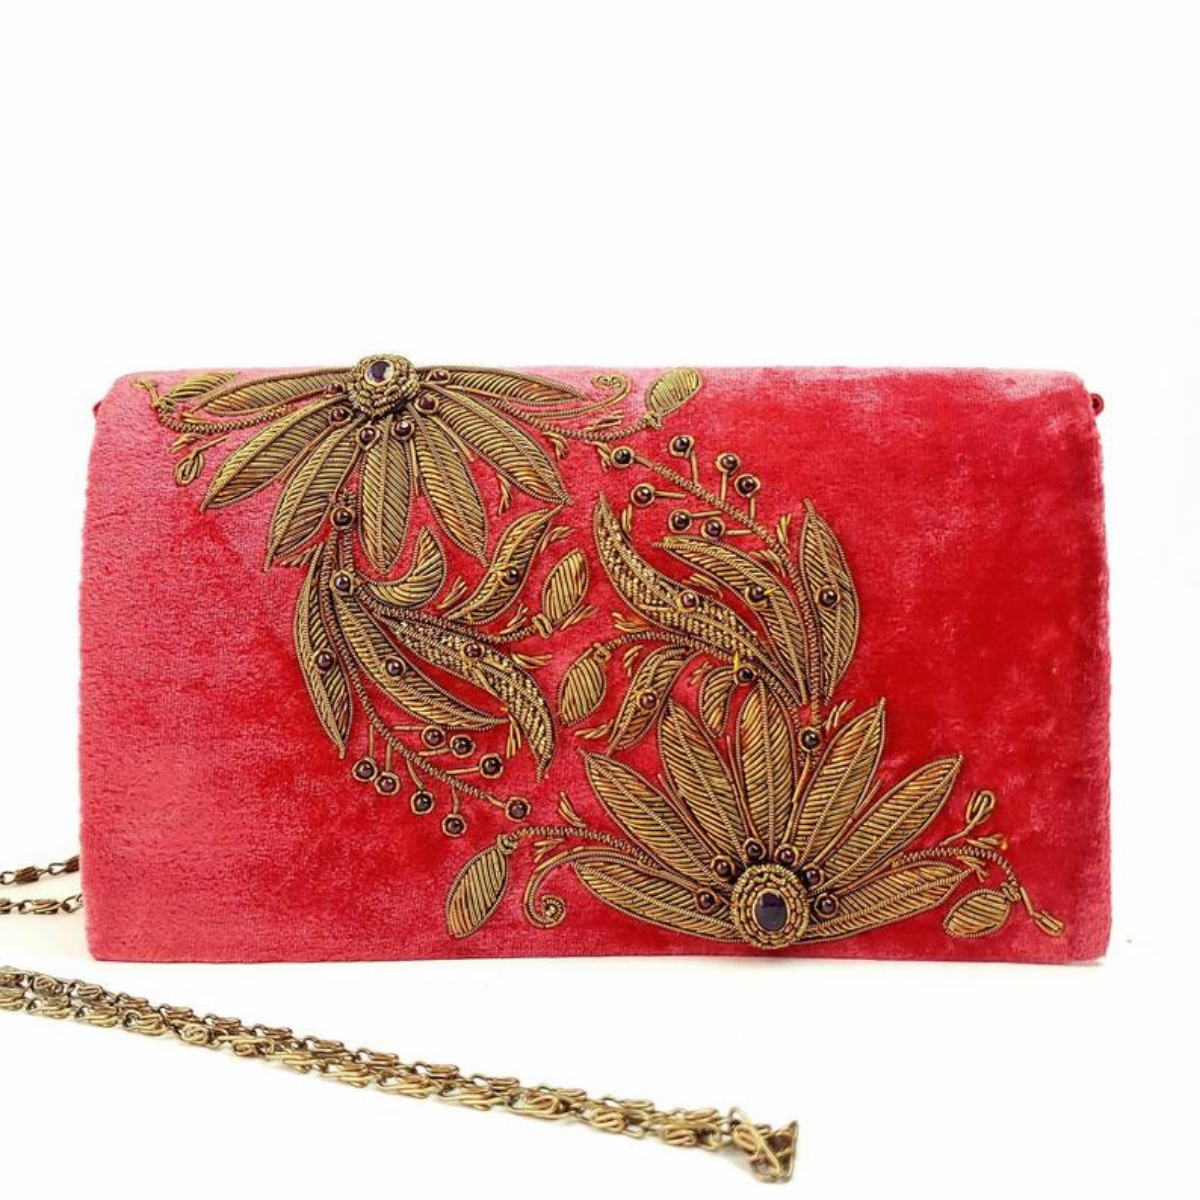 Peachy pink red velvet clutch bag embroidered with copper metallic threads and embellished with amethyst and garnets. Zardozi purse.